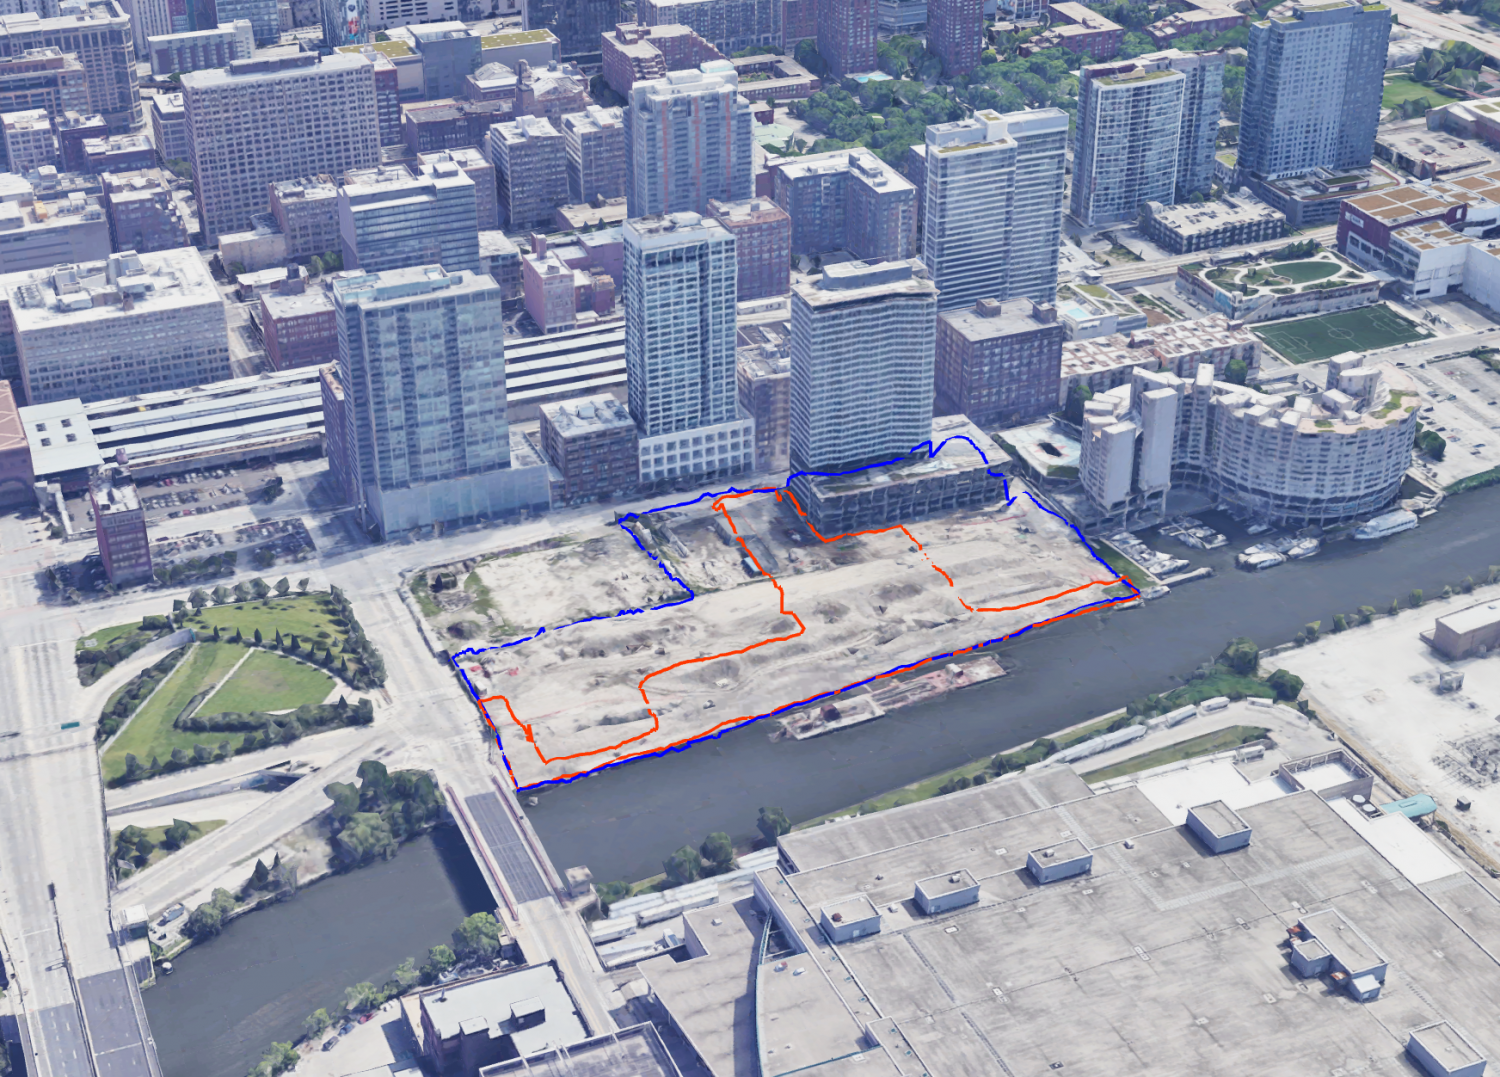 Aerial view of the Riverline Site highlighted in blue, with its inner public space highlighted in orange